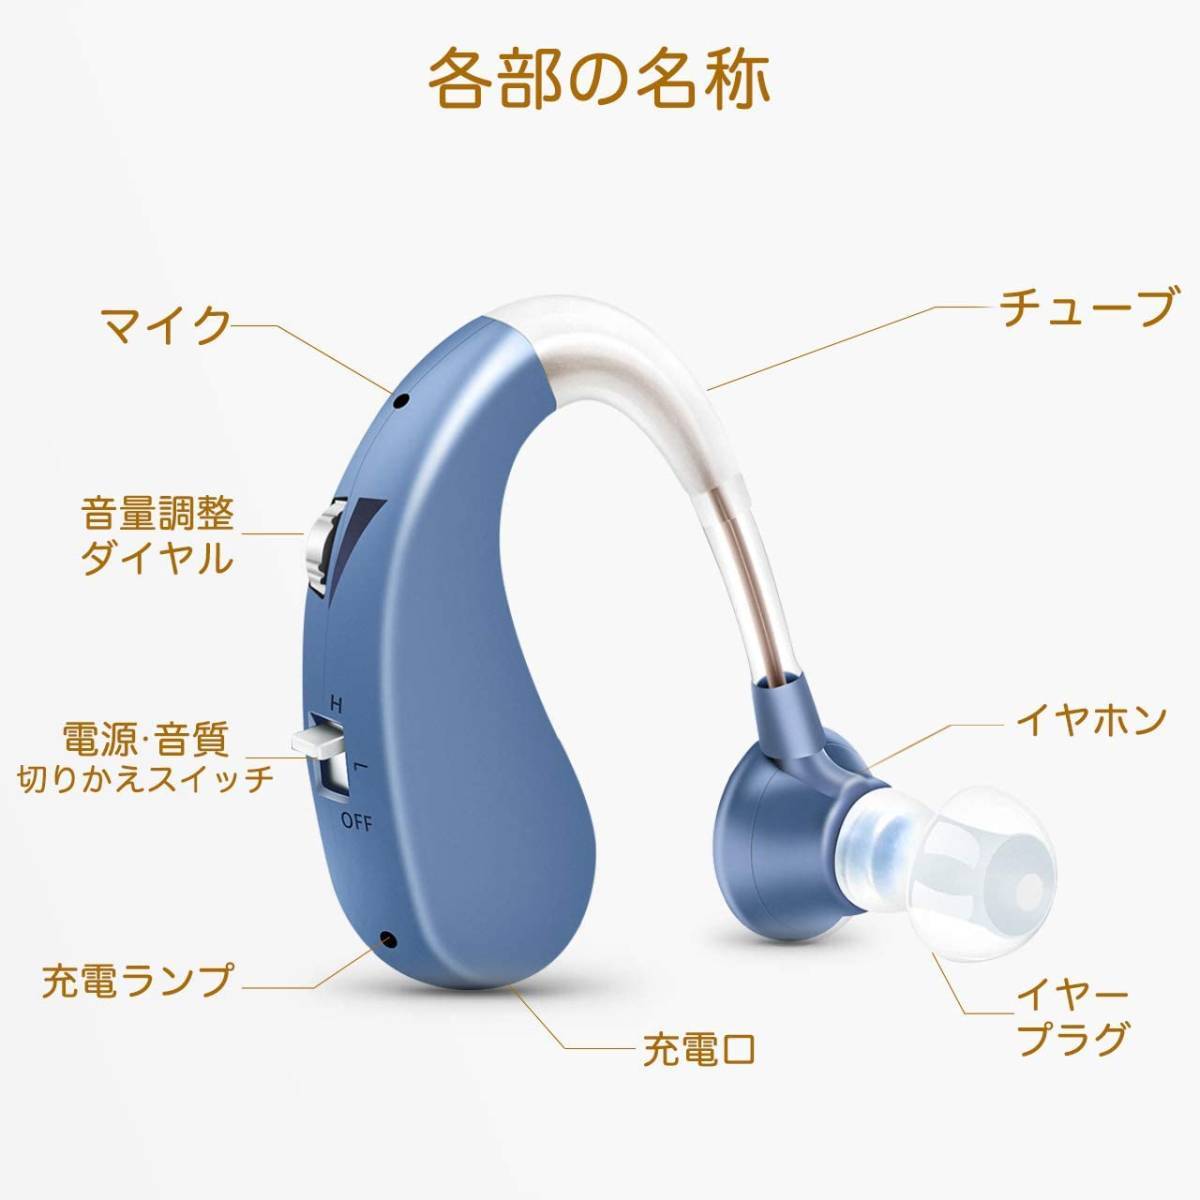 . sale compilation sound vessel hearing aid .. vessel rechargeable light weight left right both for ear .. type both parent seniours for convenience model blue 